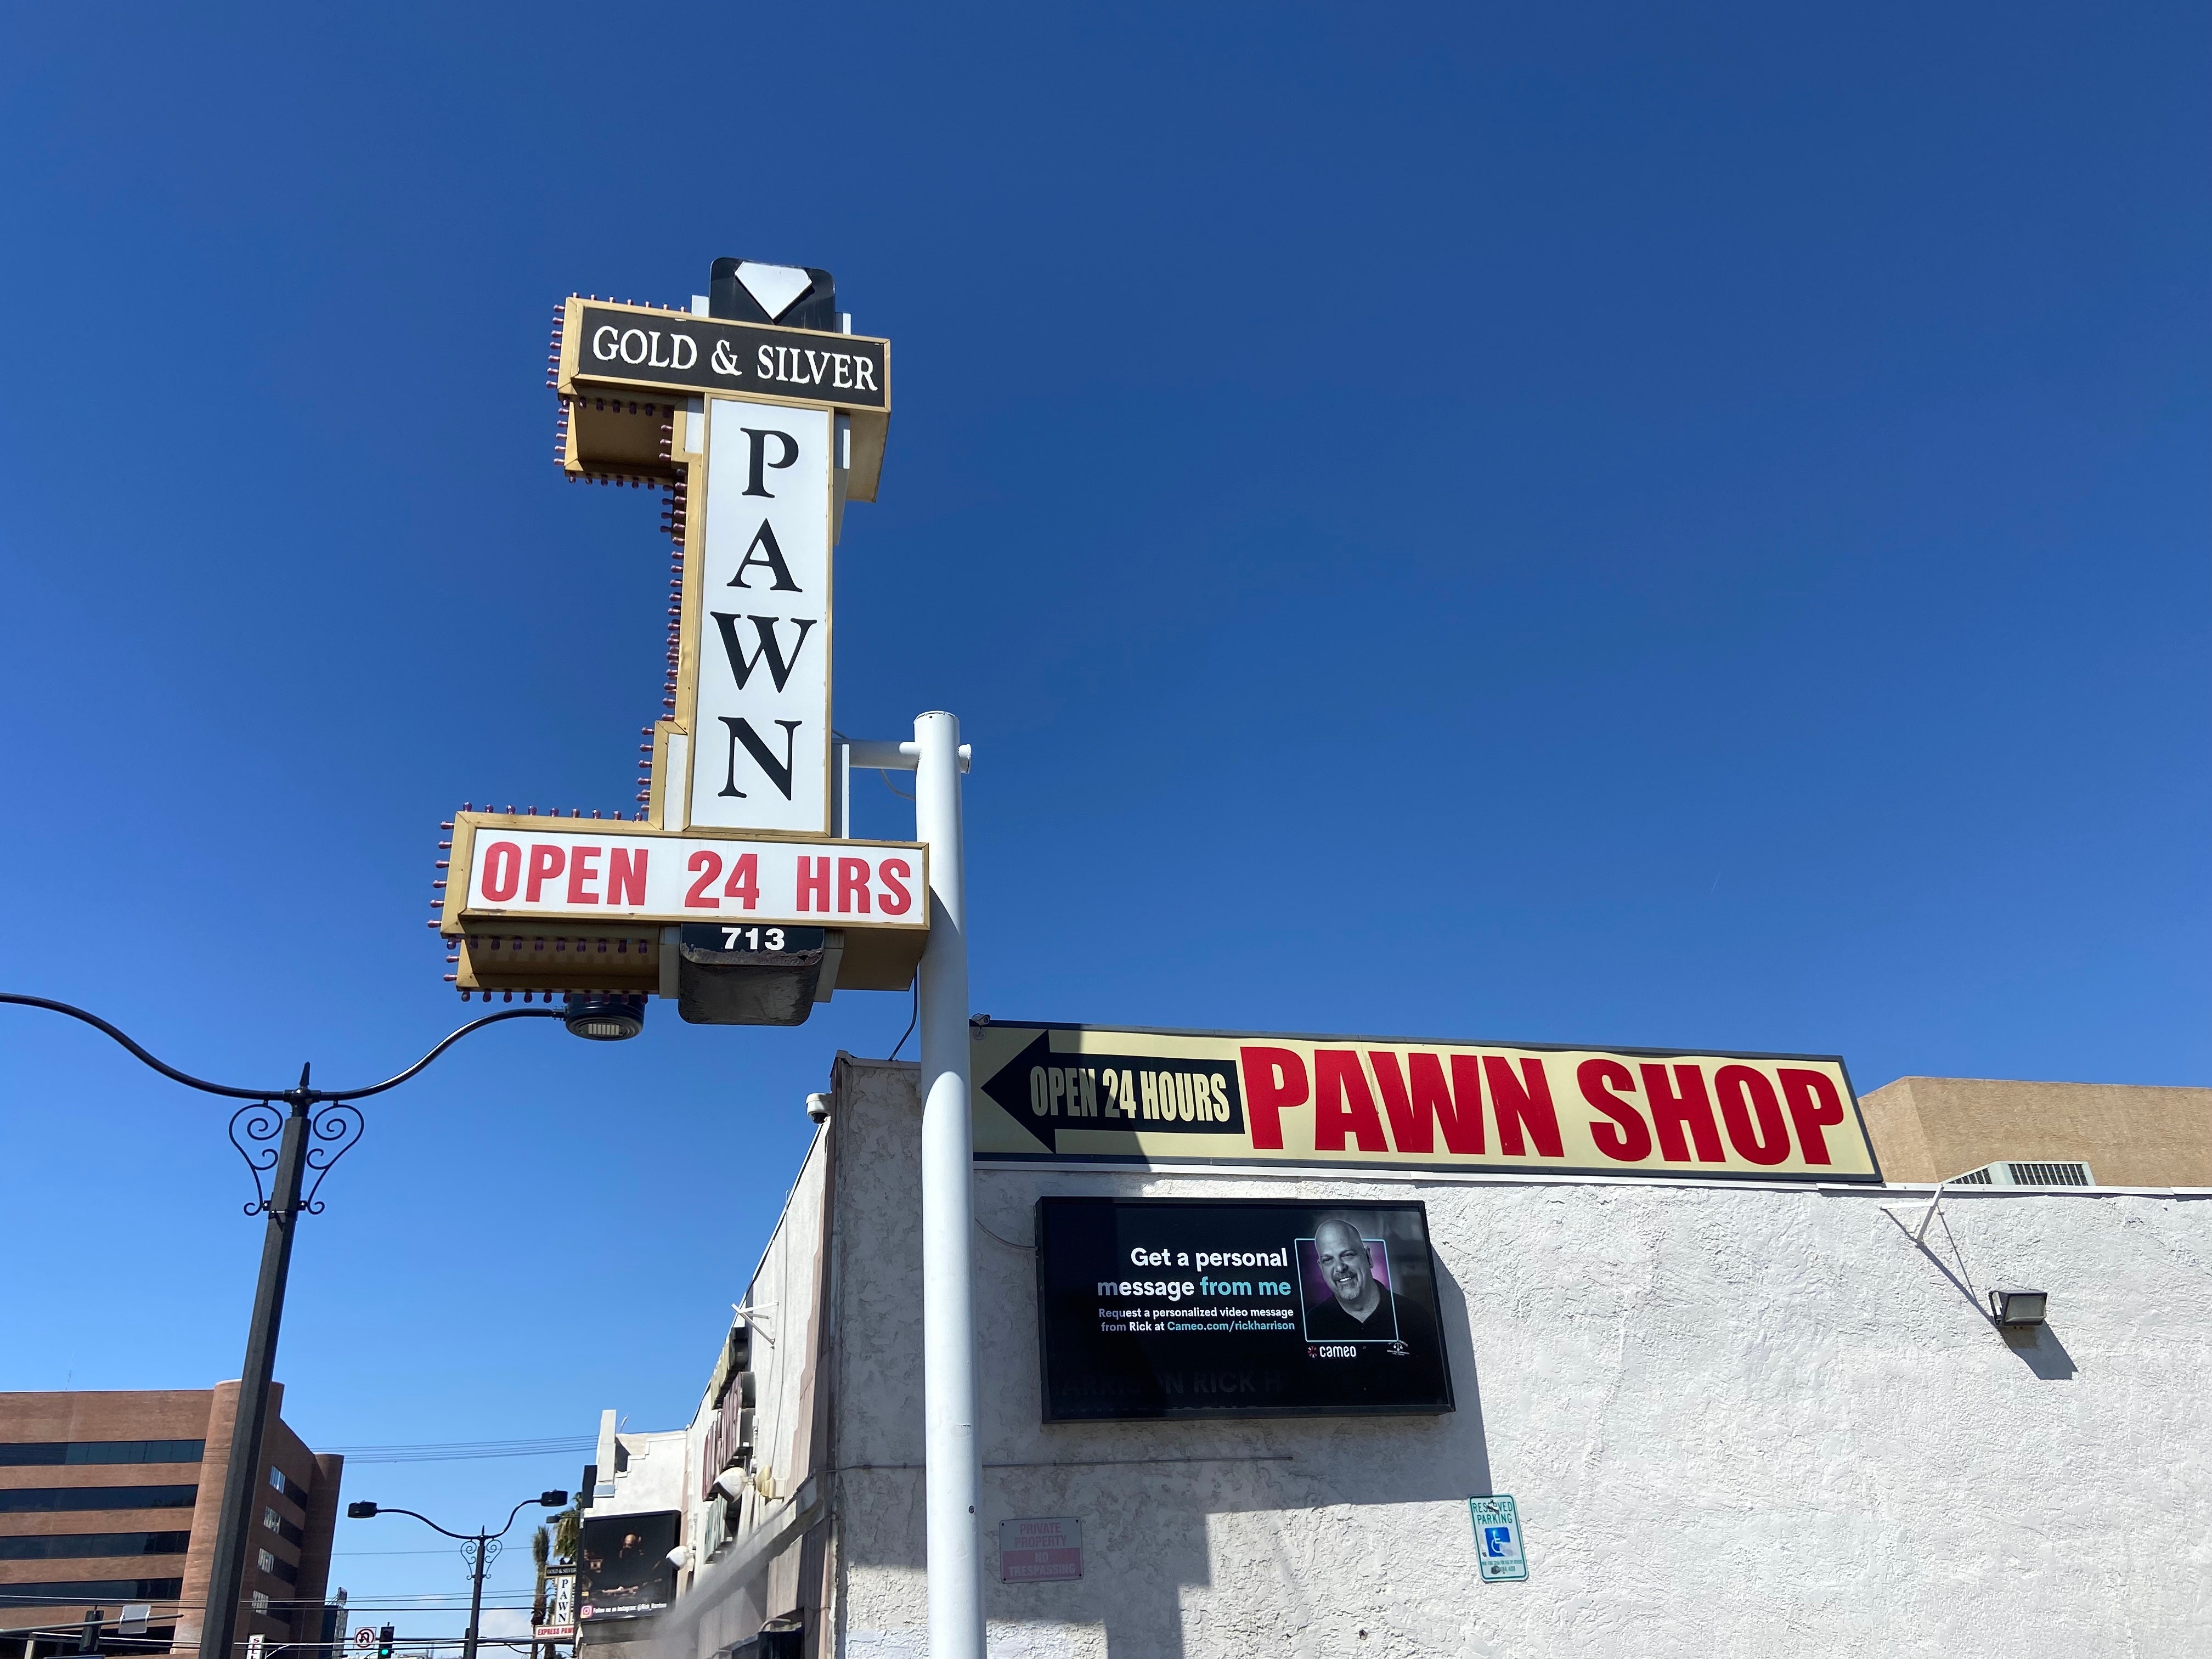 Pawn and loan stores aren't doing great in the Covid-19 economy - Vox